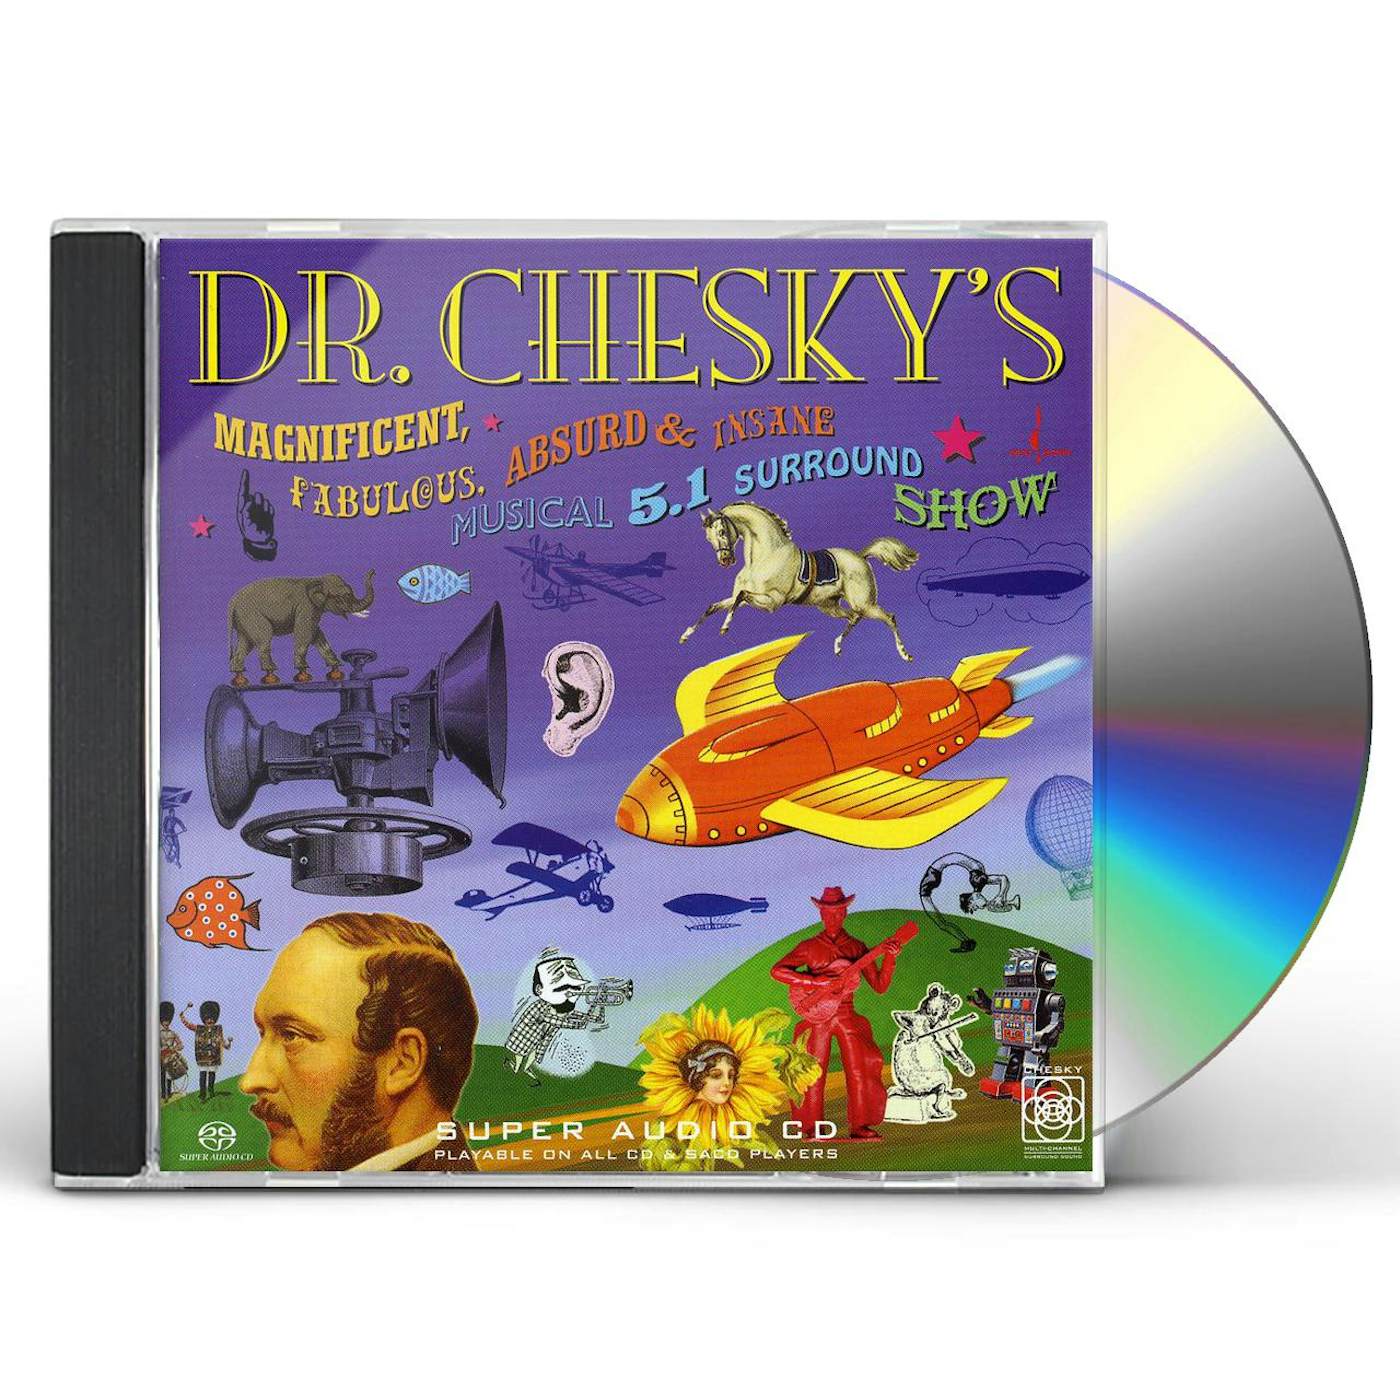 David Chesky DR CHESKY'S MAGNIFICENT FAB ABSURD MUSCAL (HYBRID) Super Audio CD